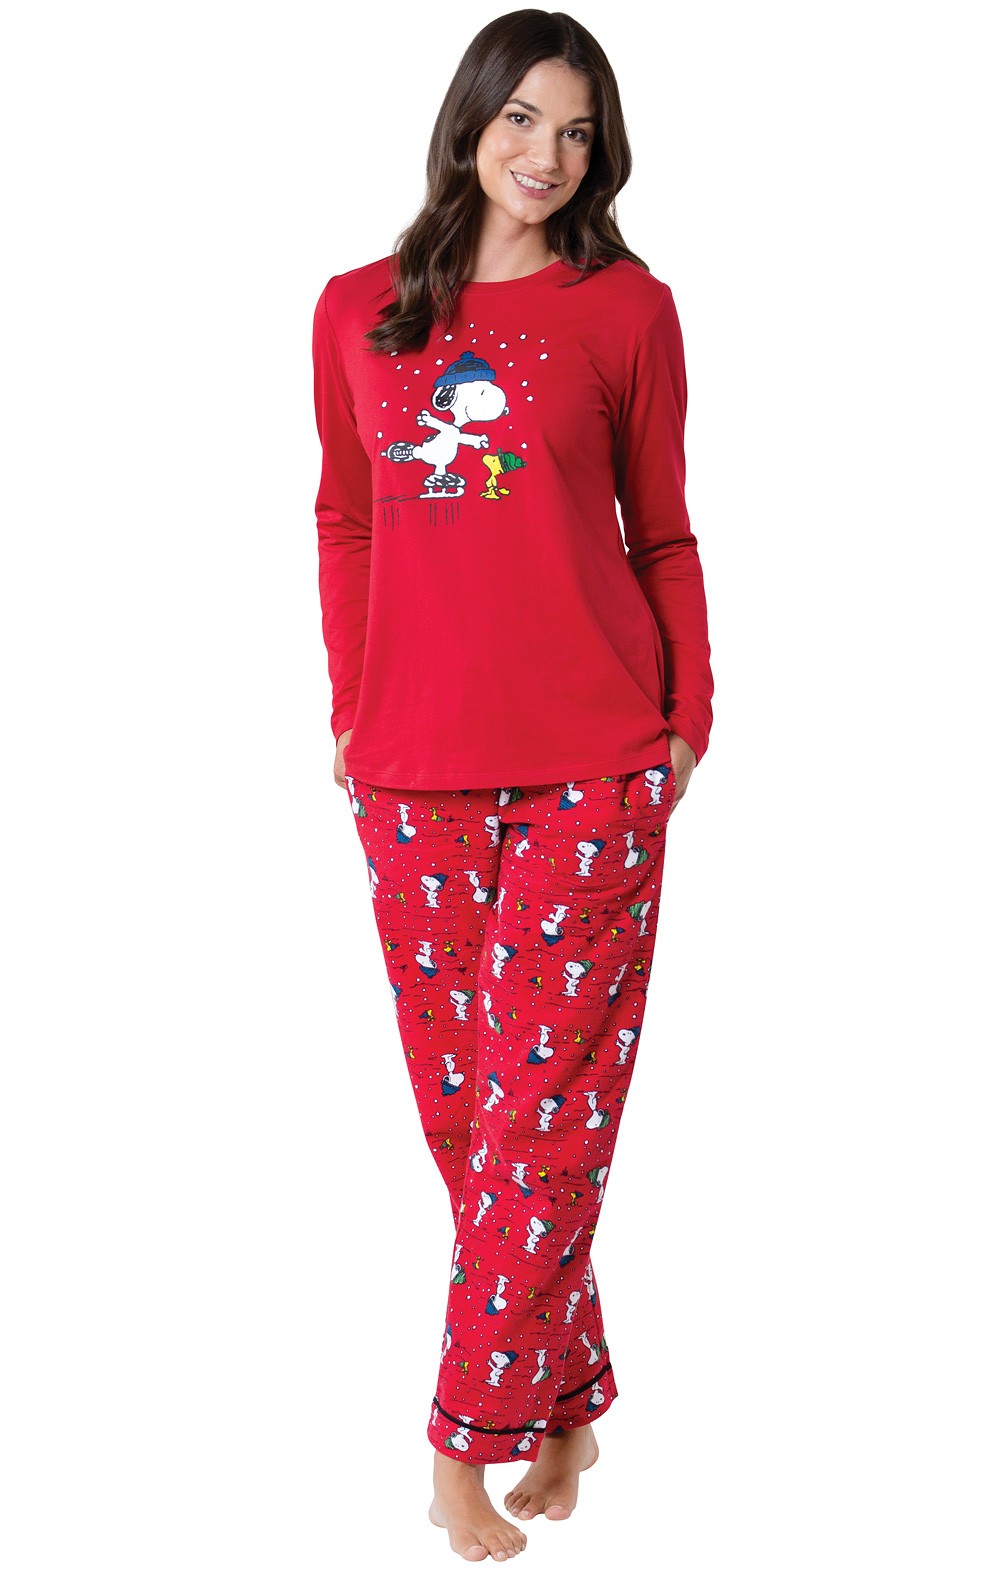 Snoopy & Woodstock Women's Pajamas in Peanuts™ | Matching Family ...